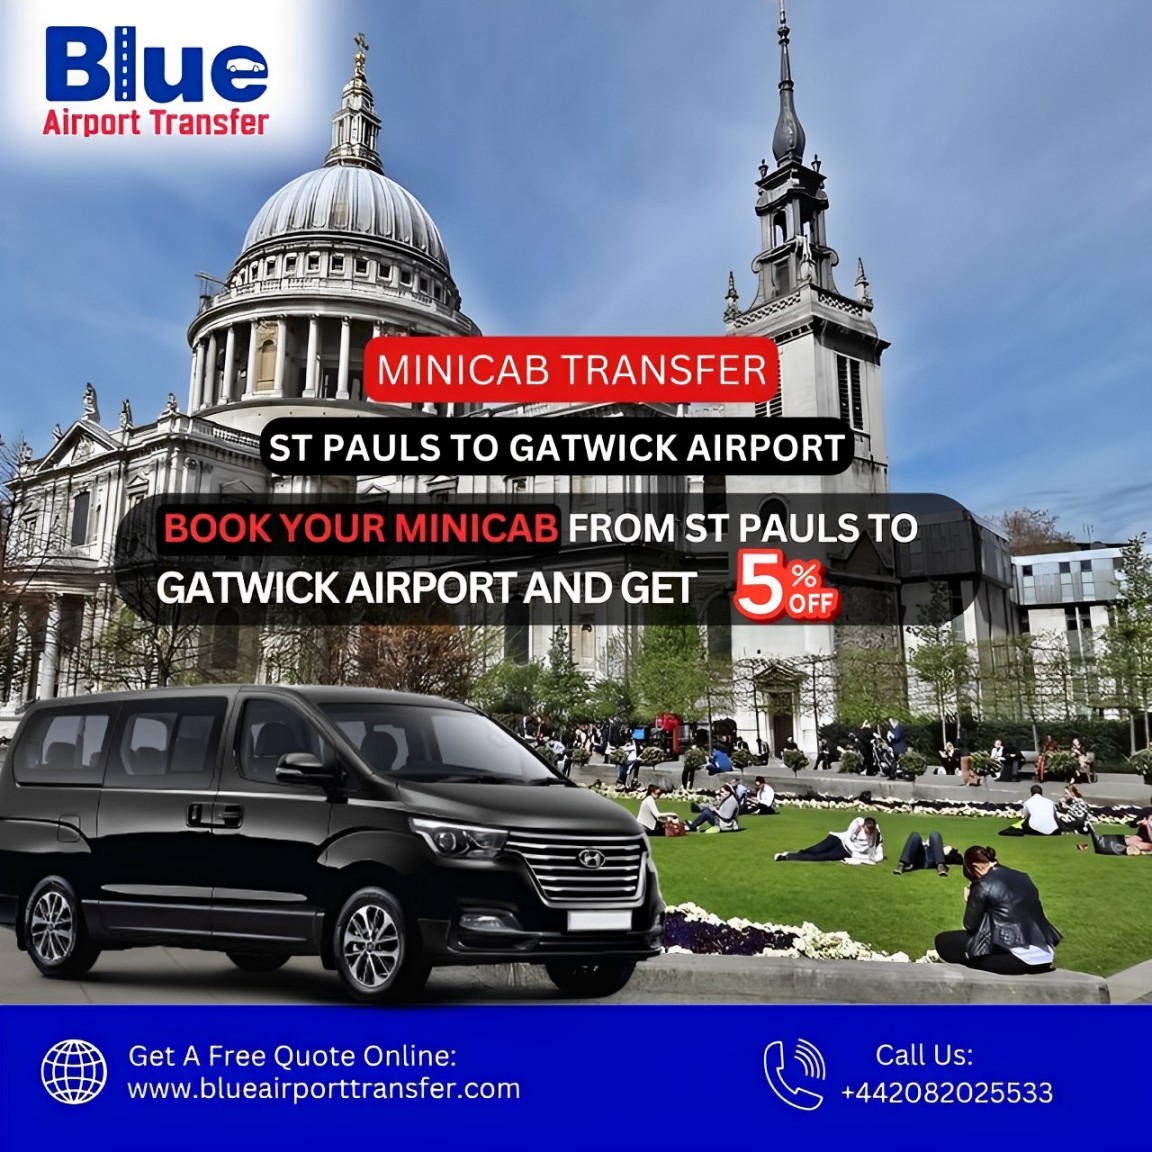 ST Pauls to Gatwick Airport Minicab Transfers.
St. Paul's to Gatwick Airport with our reliable minicab service. E
.
.
.
.
#stpaulsto #gatwickairport
#airporttransfer #MinicabService
#gatwickbound
#londontraveltips
#airportshuttle
#ConvenientTransfers